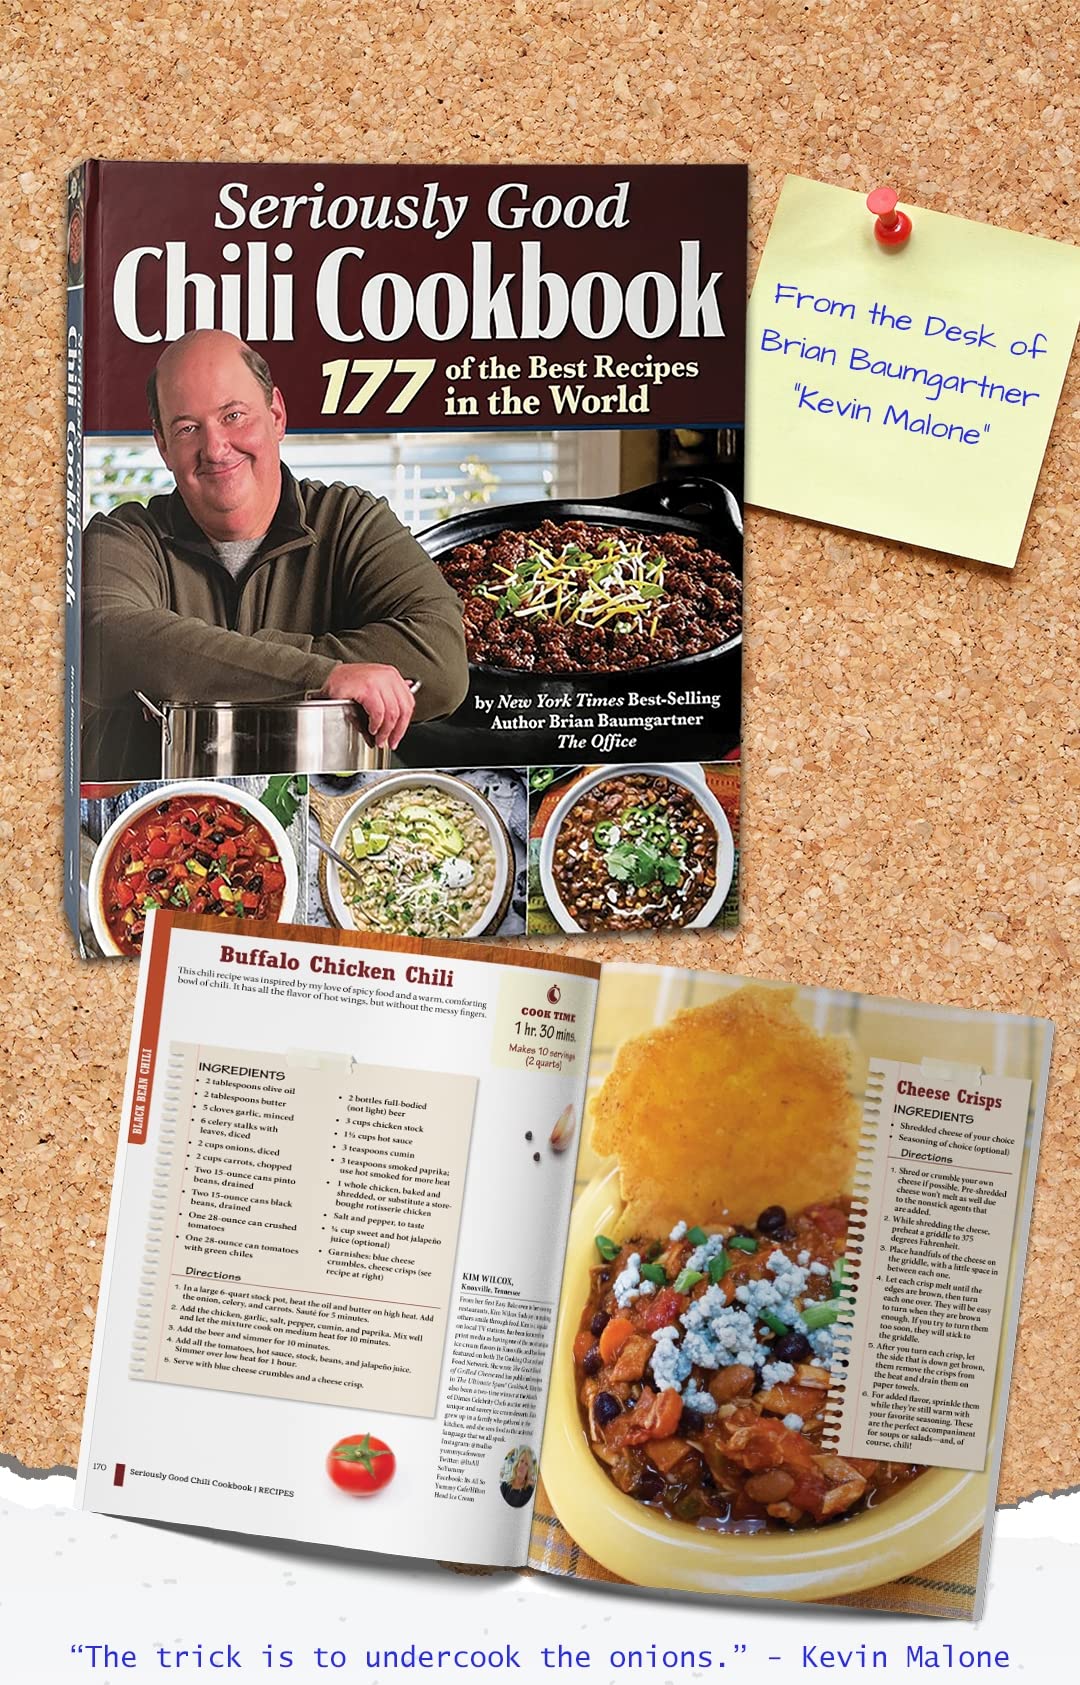 Seriously Good Chili Cookbook: 177 of the Best Recipes in the World (Fox Chapel Publishing) Explore the Ultimate Comfort Food with Brian Baumgartner, aka Kevin Malone from The Office